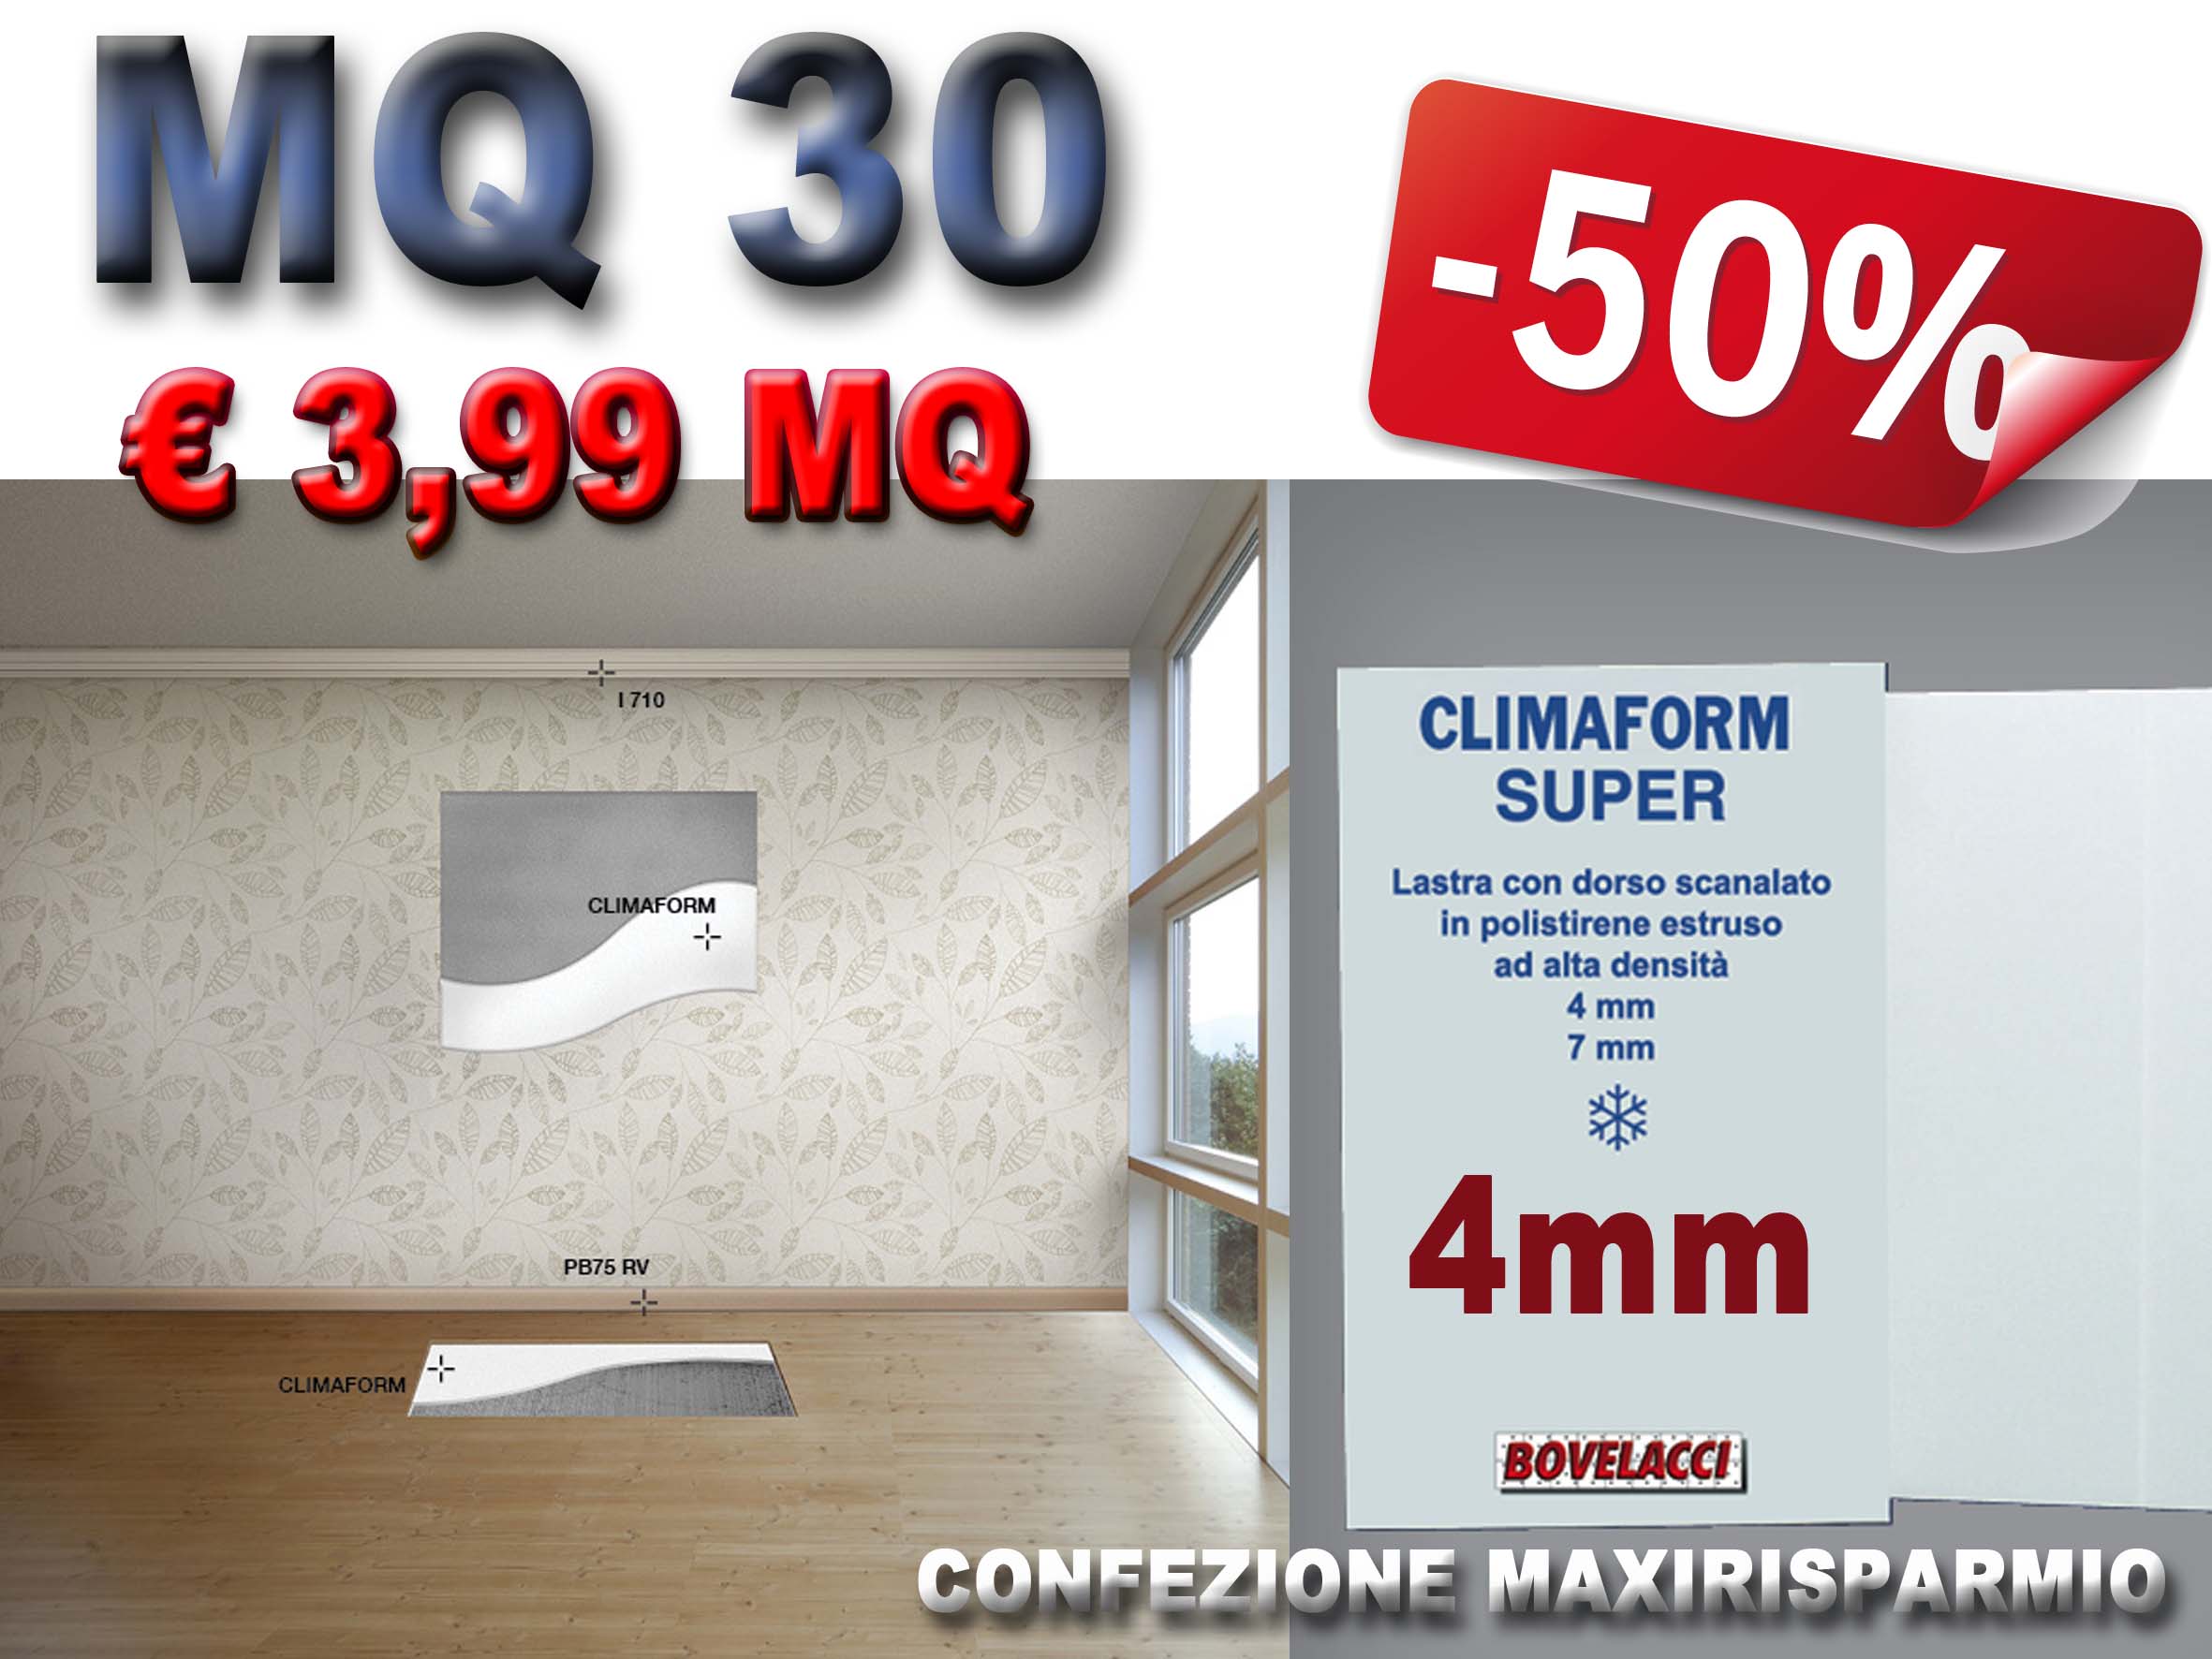 30 m2 of CLIMAFORM SUPER 4mm high density insulating and